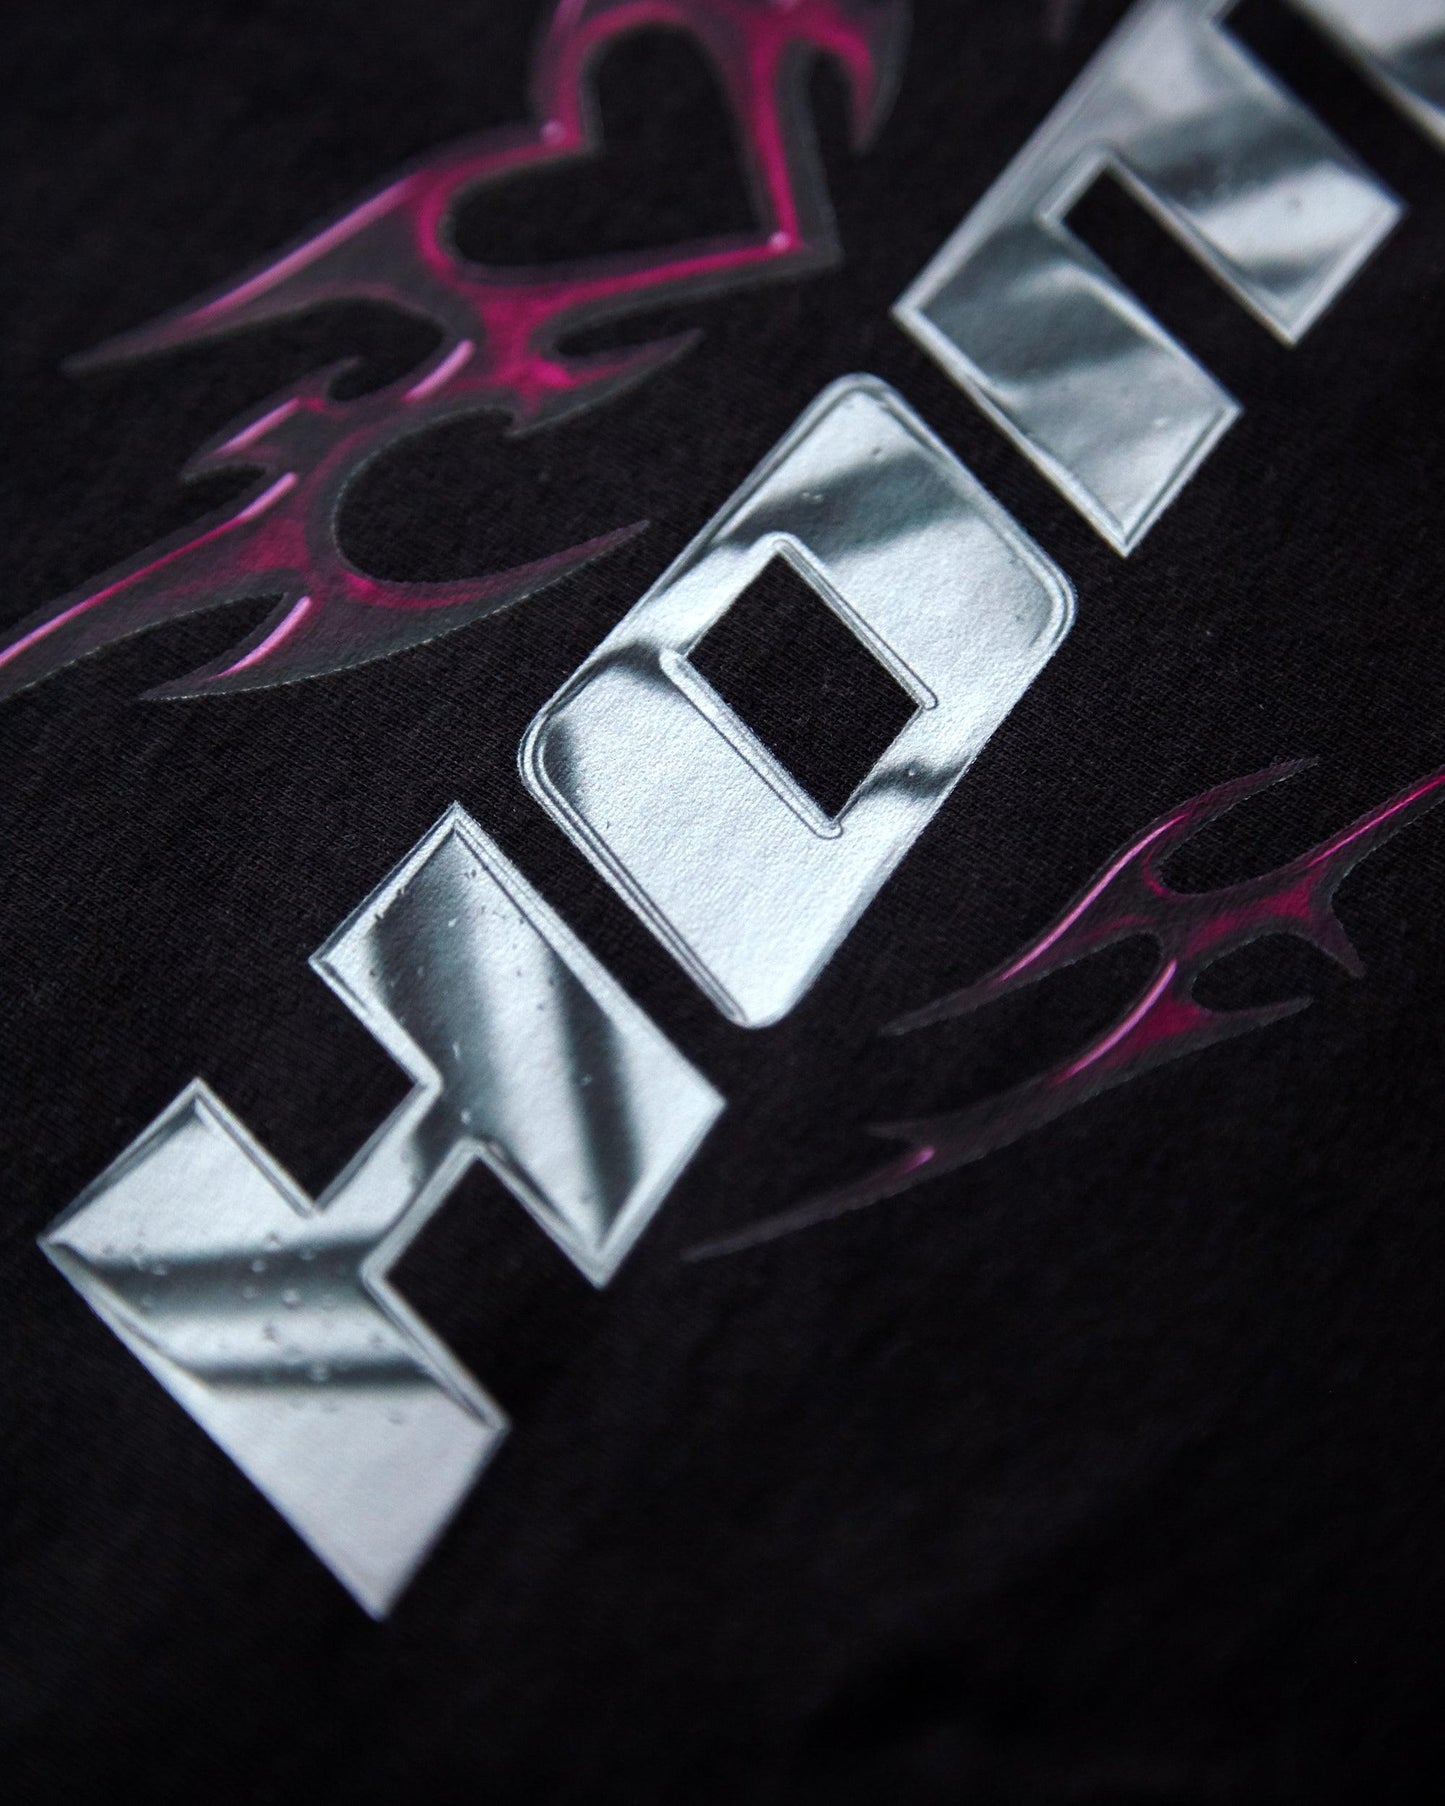 Chrome Y2K: HOMO, silver and pink on black - pullover hoodie.